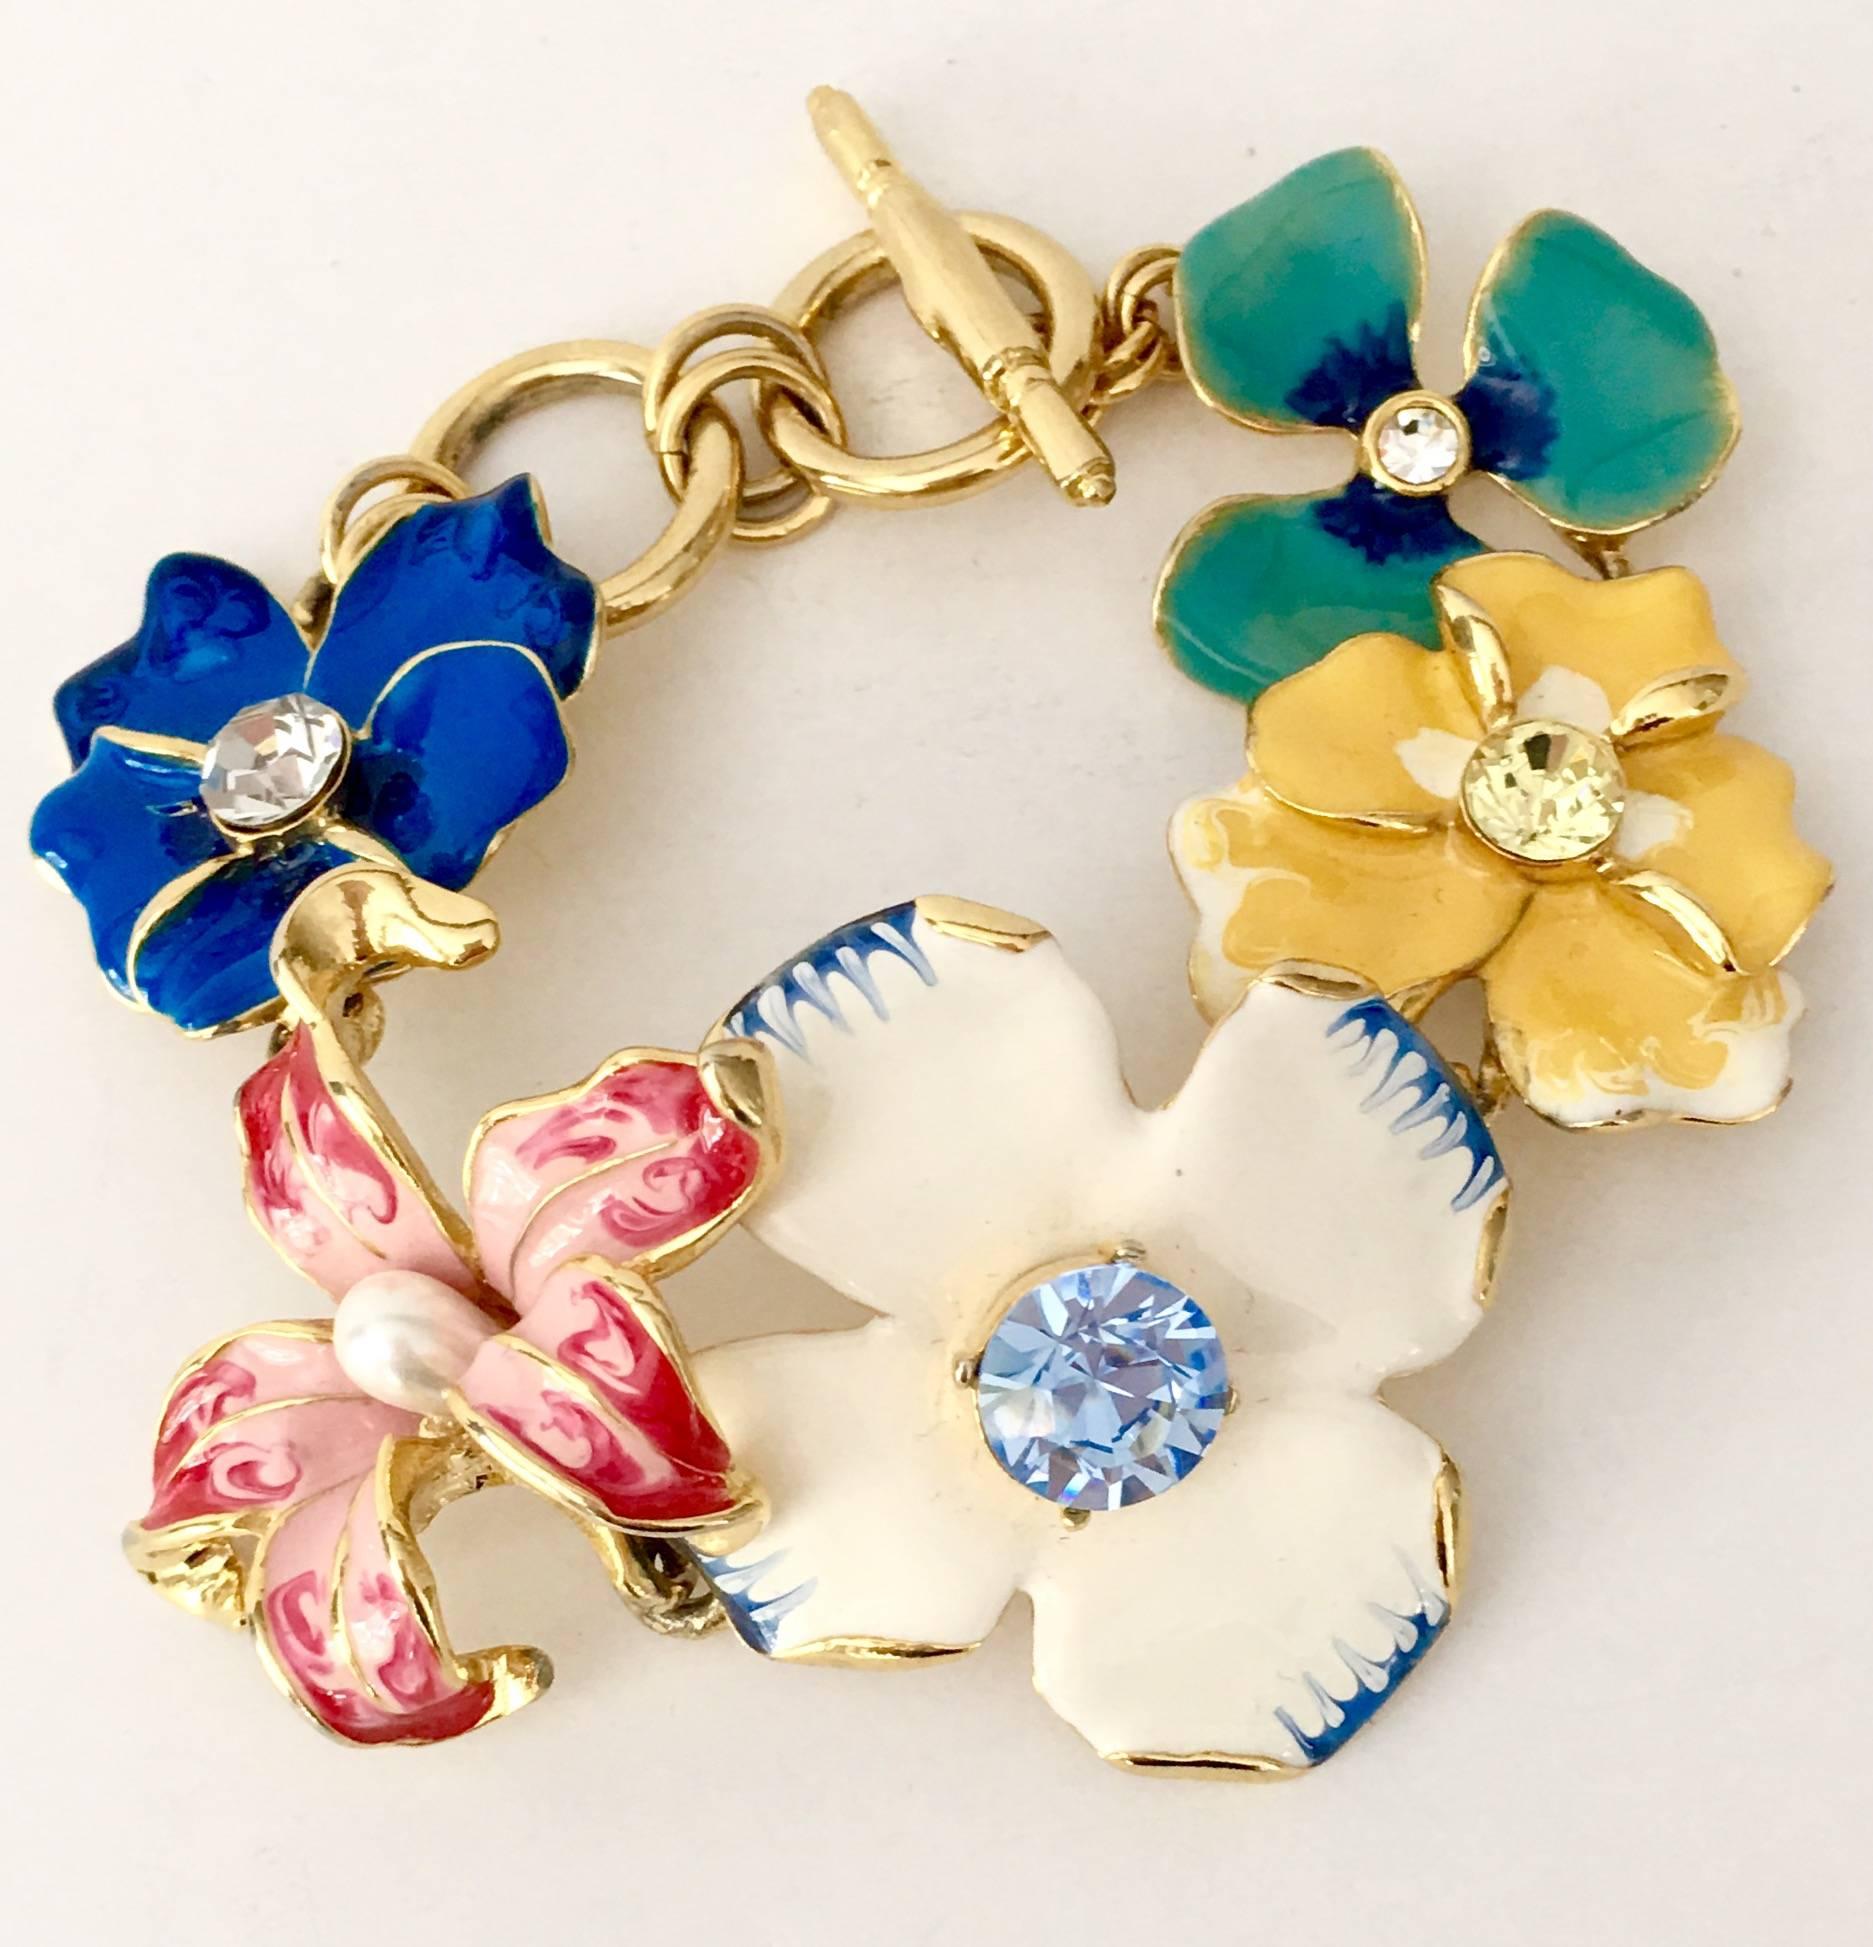 Kenneth Lane enamel, Swarovski crystal and gold plate toggle bracelet. Signed on the toggle and underside, Kenneth Lane. Five vibrant colored flowers and gold plate chain link make up this "happy" piece from famed jeweler, Kenneth Jay Lane.